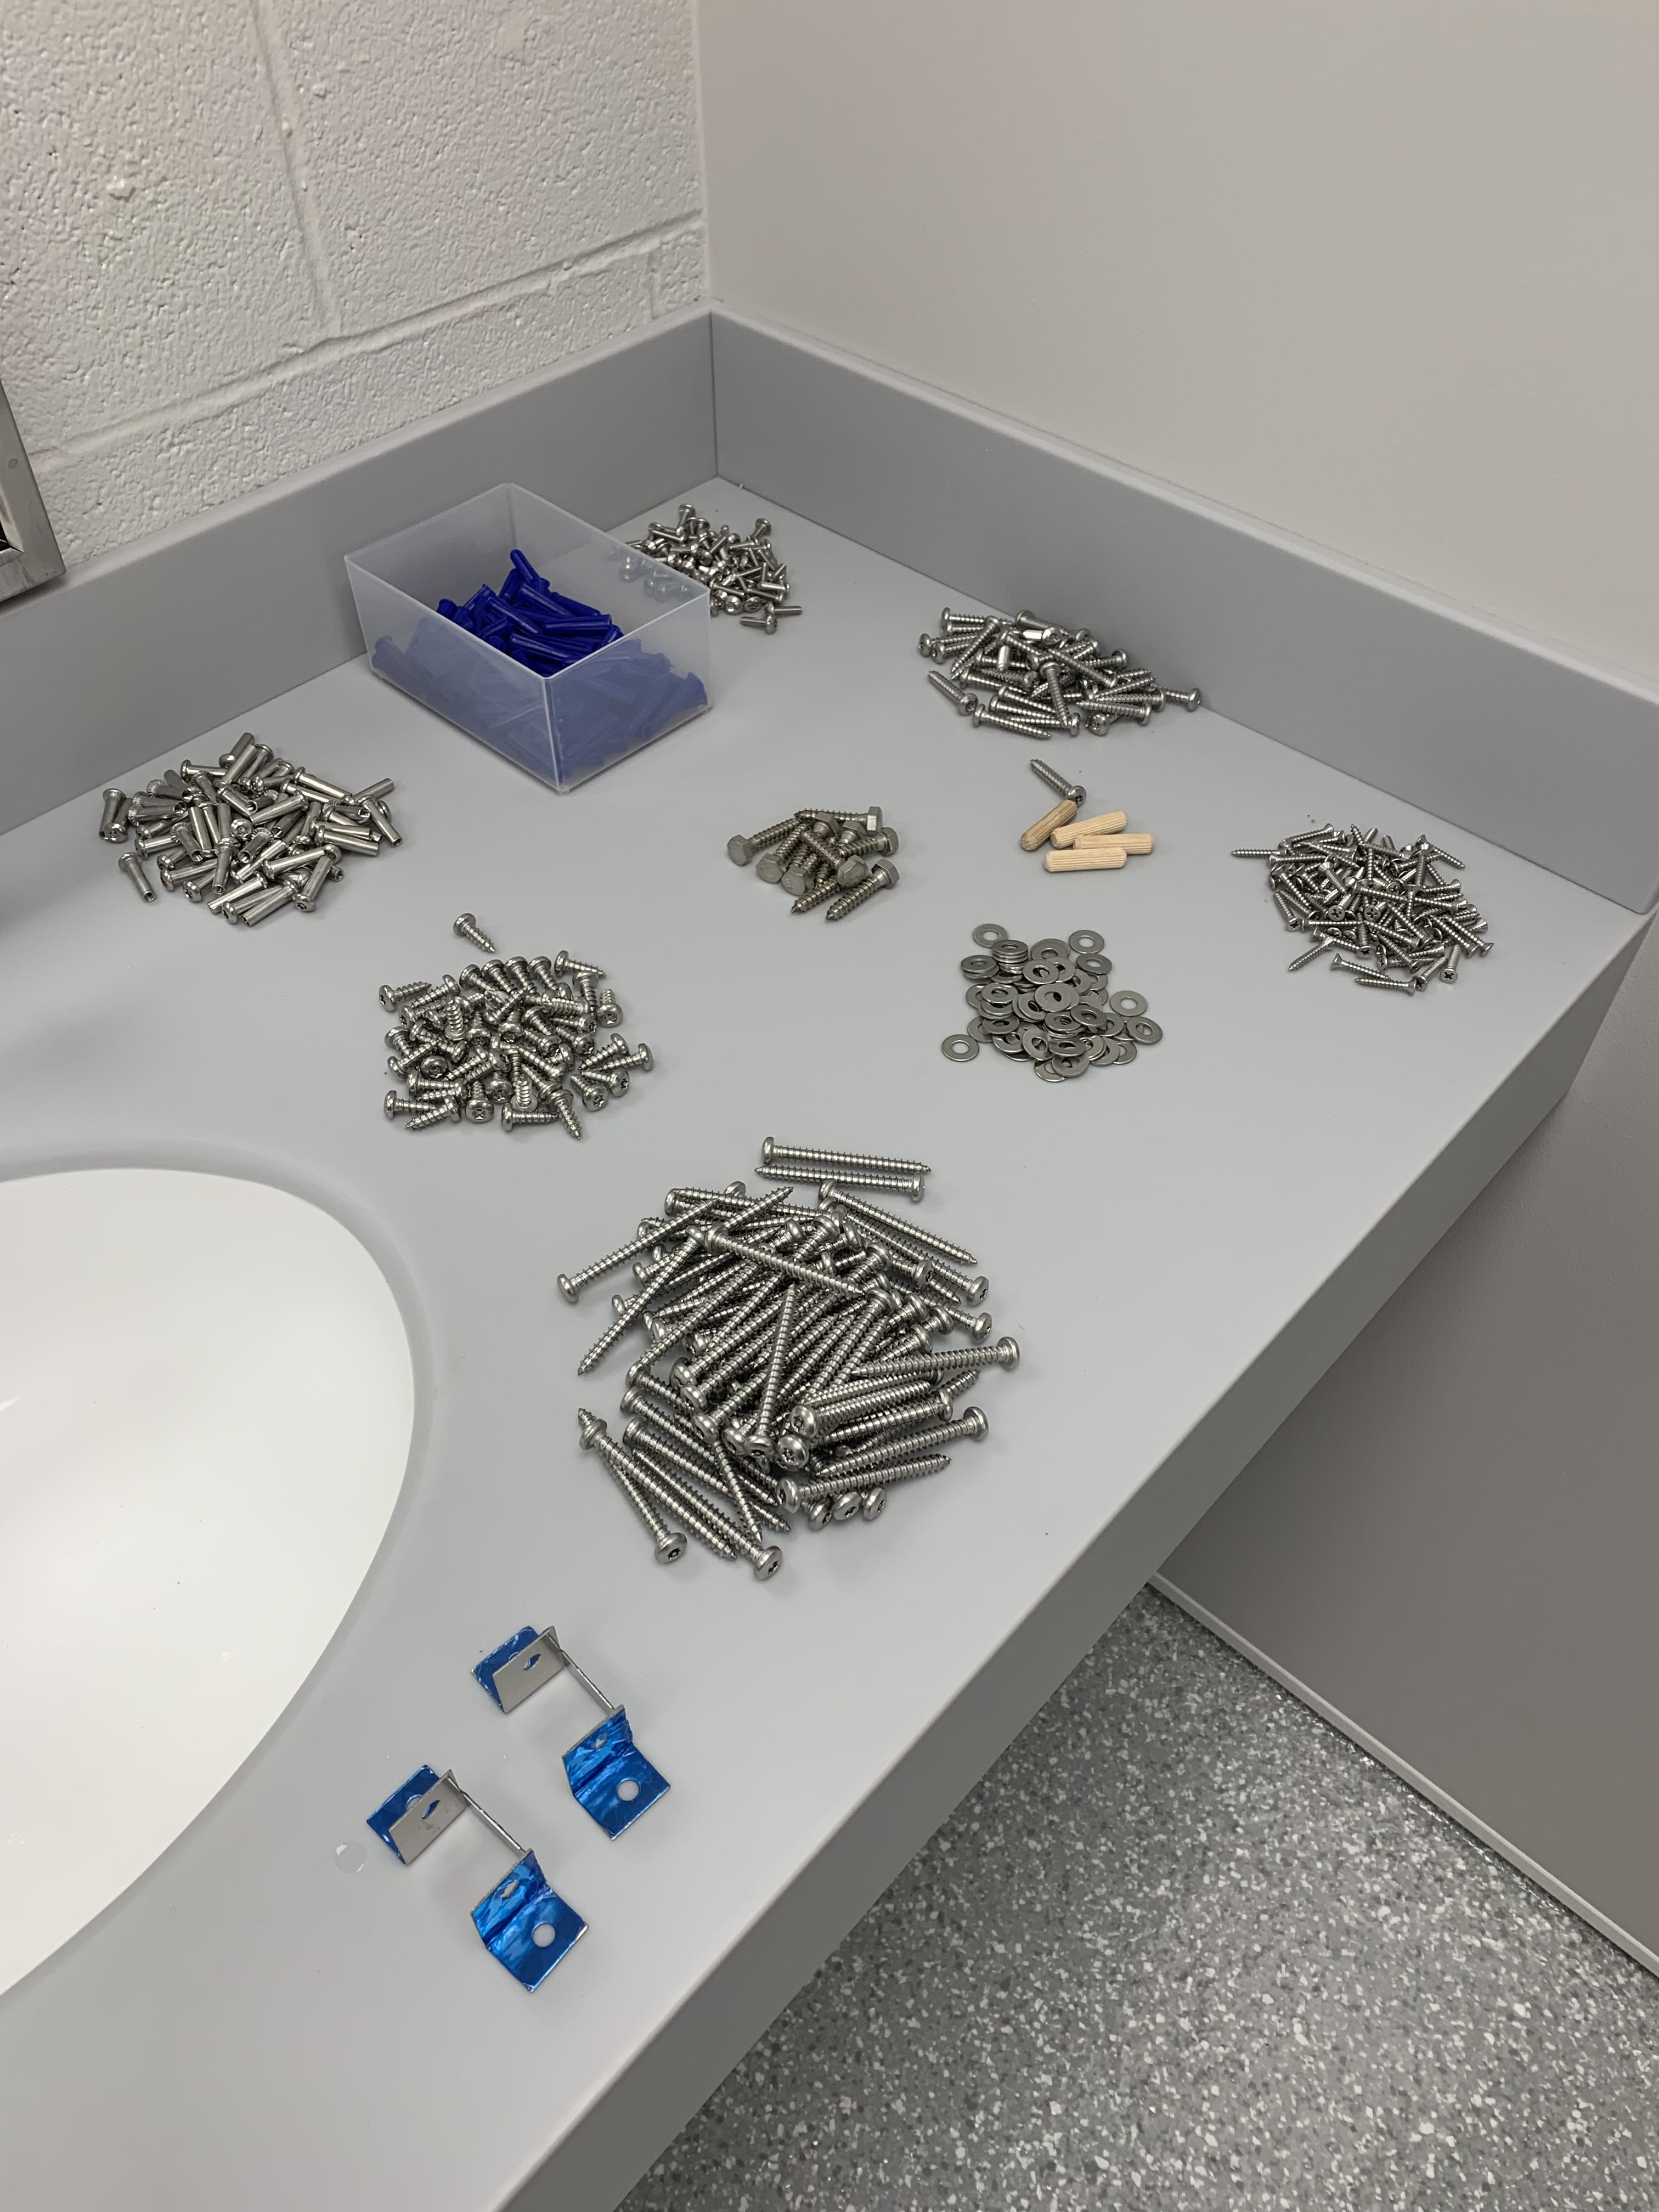 Photo of hardware for a bathroom stall installation separated into piles